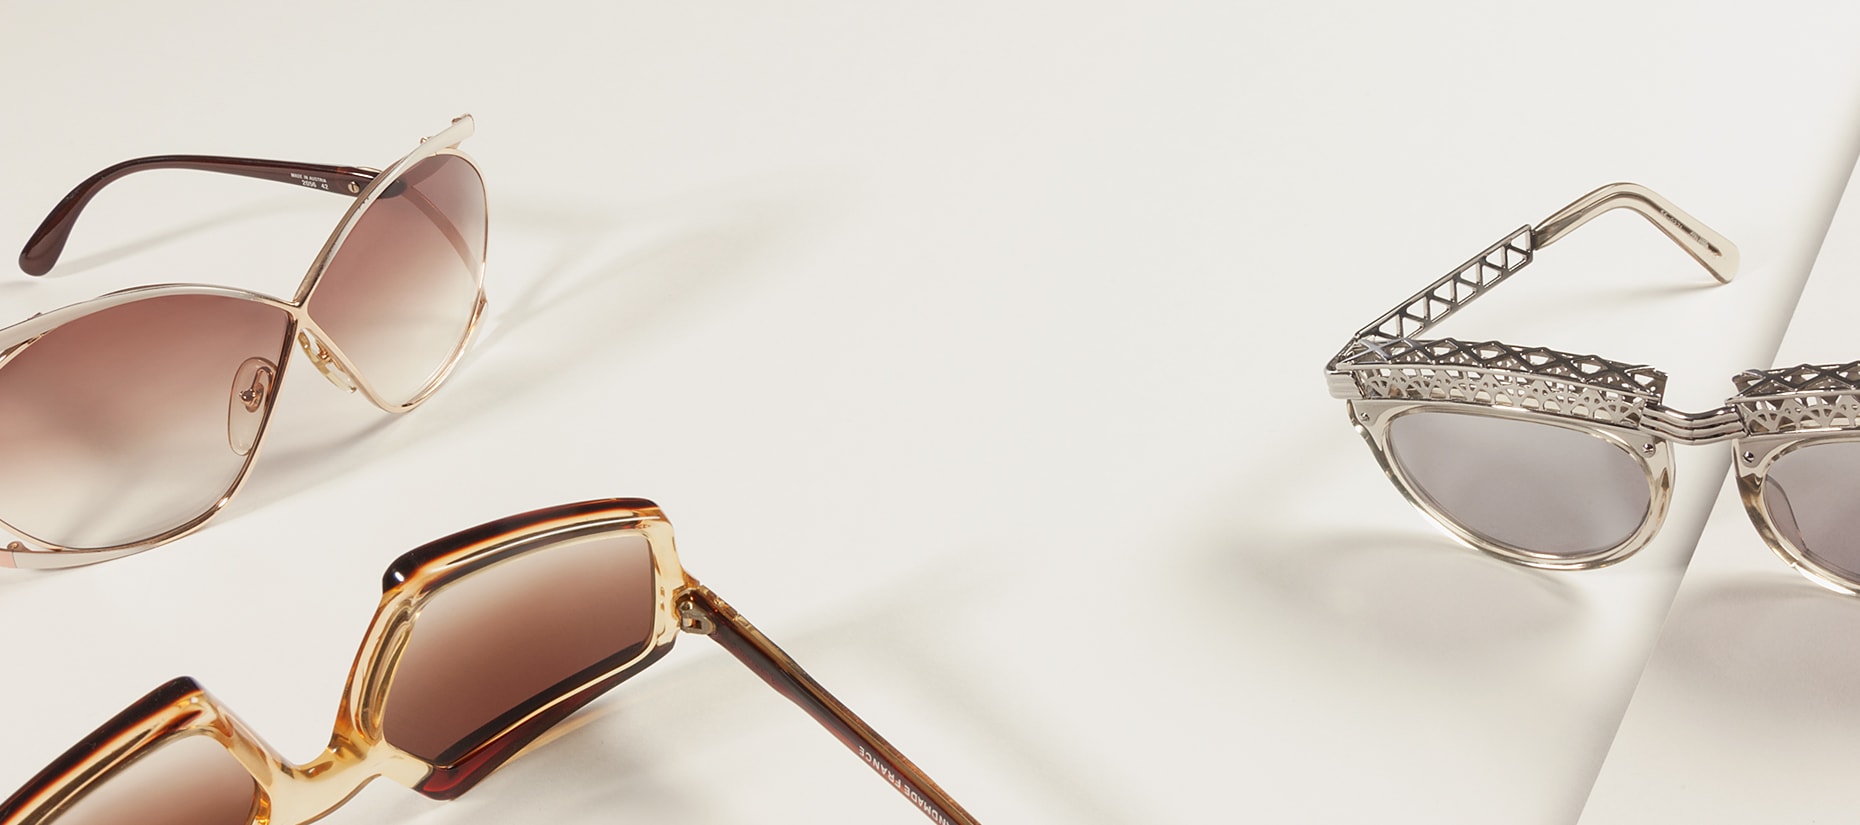 Insiders' tips brands - special vintage designer glasses from the 60s to the 90s